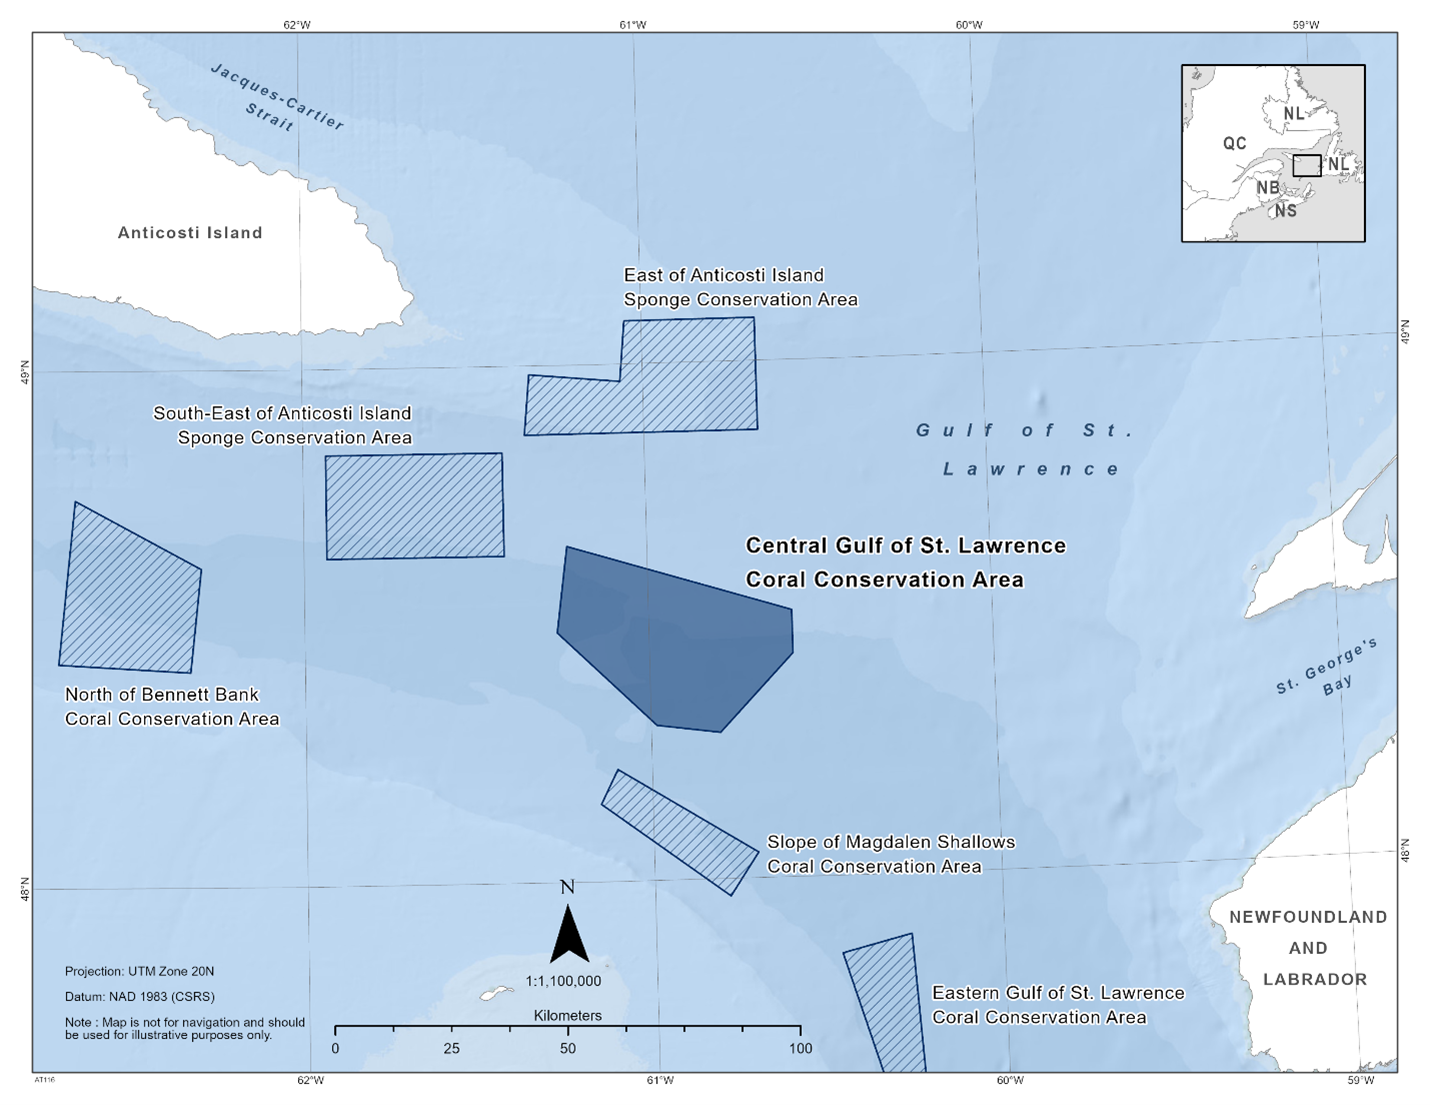 Map of the Central Gulf of St. Lawrence Coral Conservation Area in dark blue. The map also features the other marine refuges nearby with dark blue diagonal lines across (East of Anticosti Island Sponge Conservation Area, South-East of Anticosti Island Sponge Conservation Area, North of Bennett Bank Coral Conservation Area, Slope of Magdalen Shallows Coral Conservation Area, and the Eastern Gulf of St. Lawrence Coral Conservation Area).